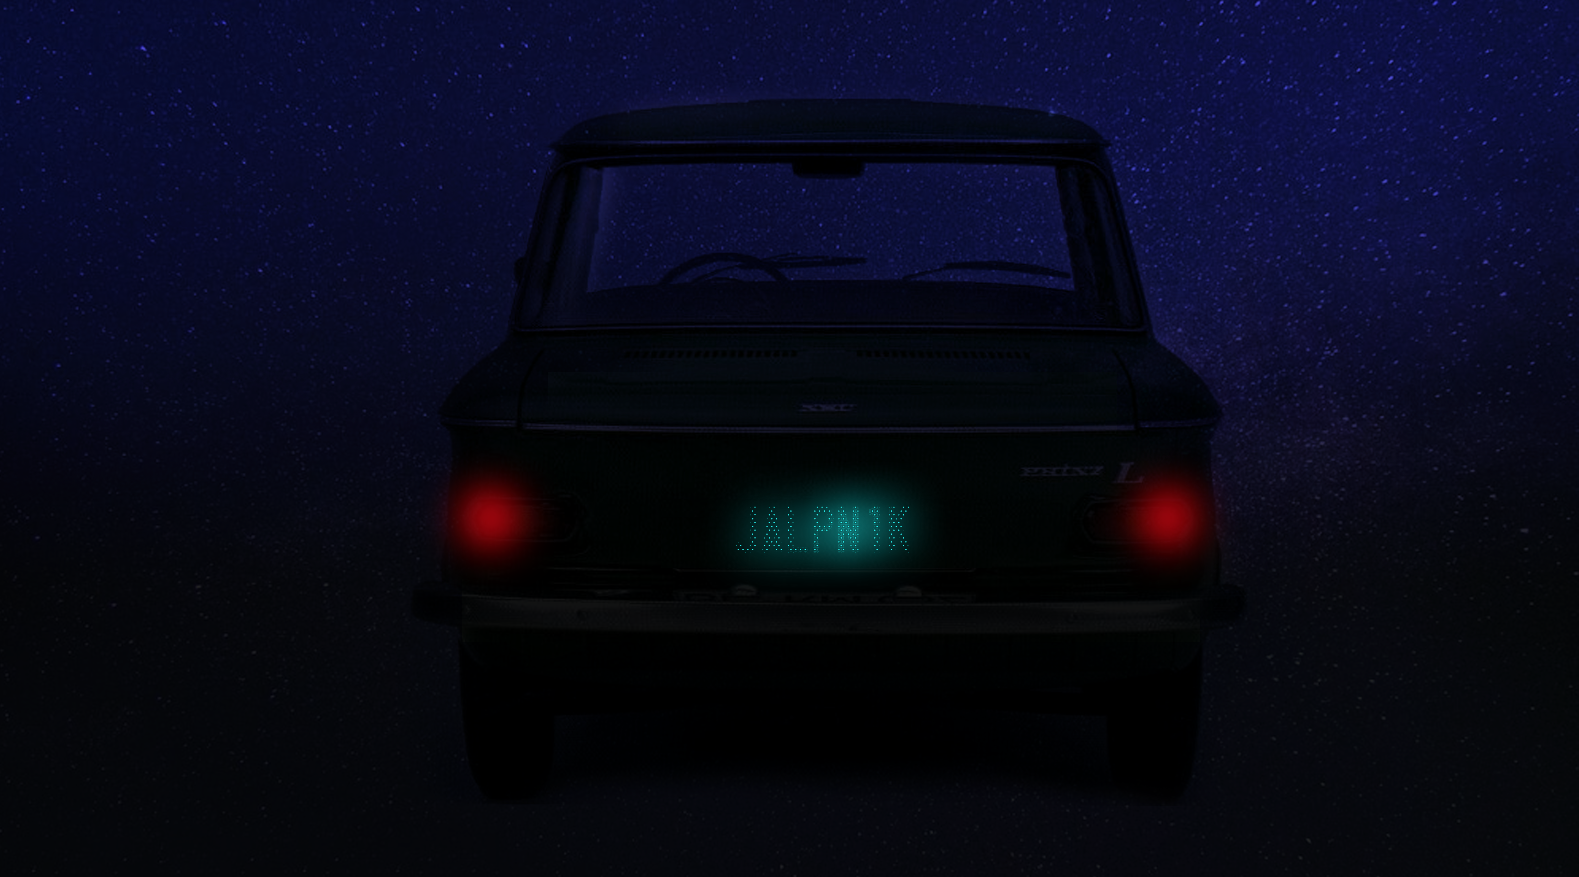 I’ve Got A Really Simple Idea To Improve The Legibility Of License Plates At Night